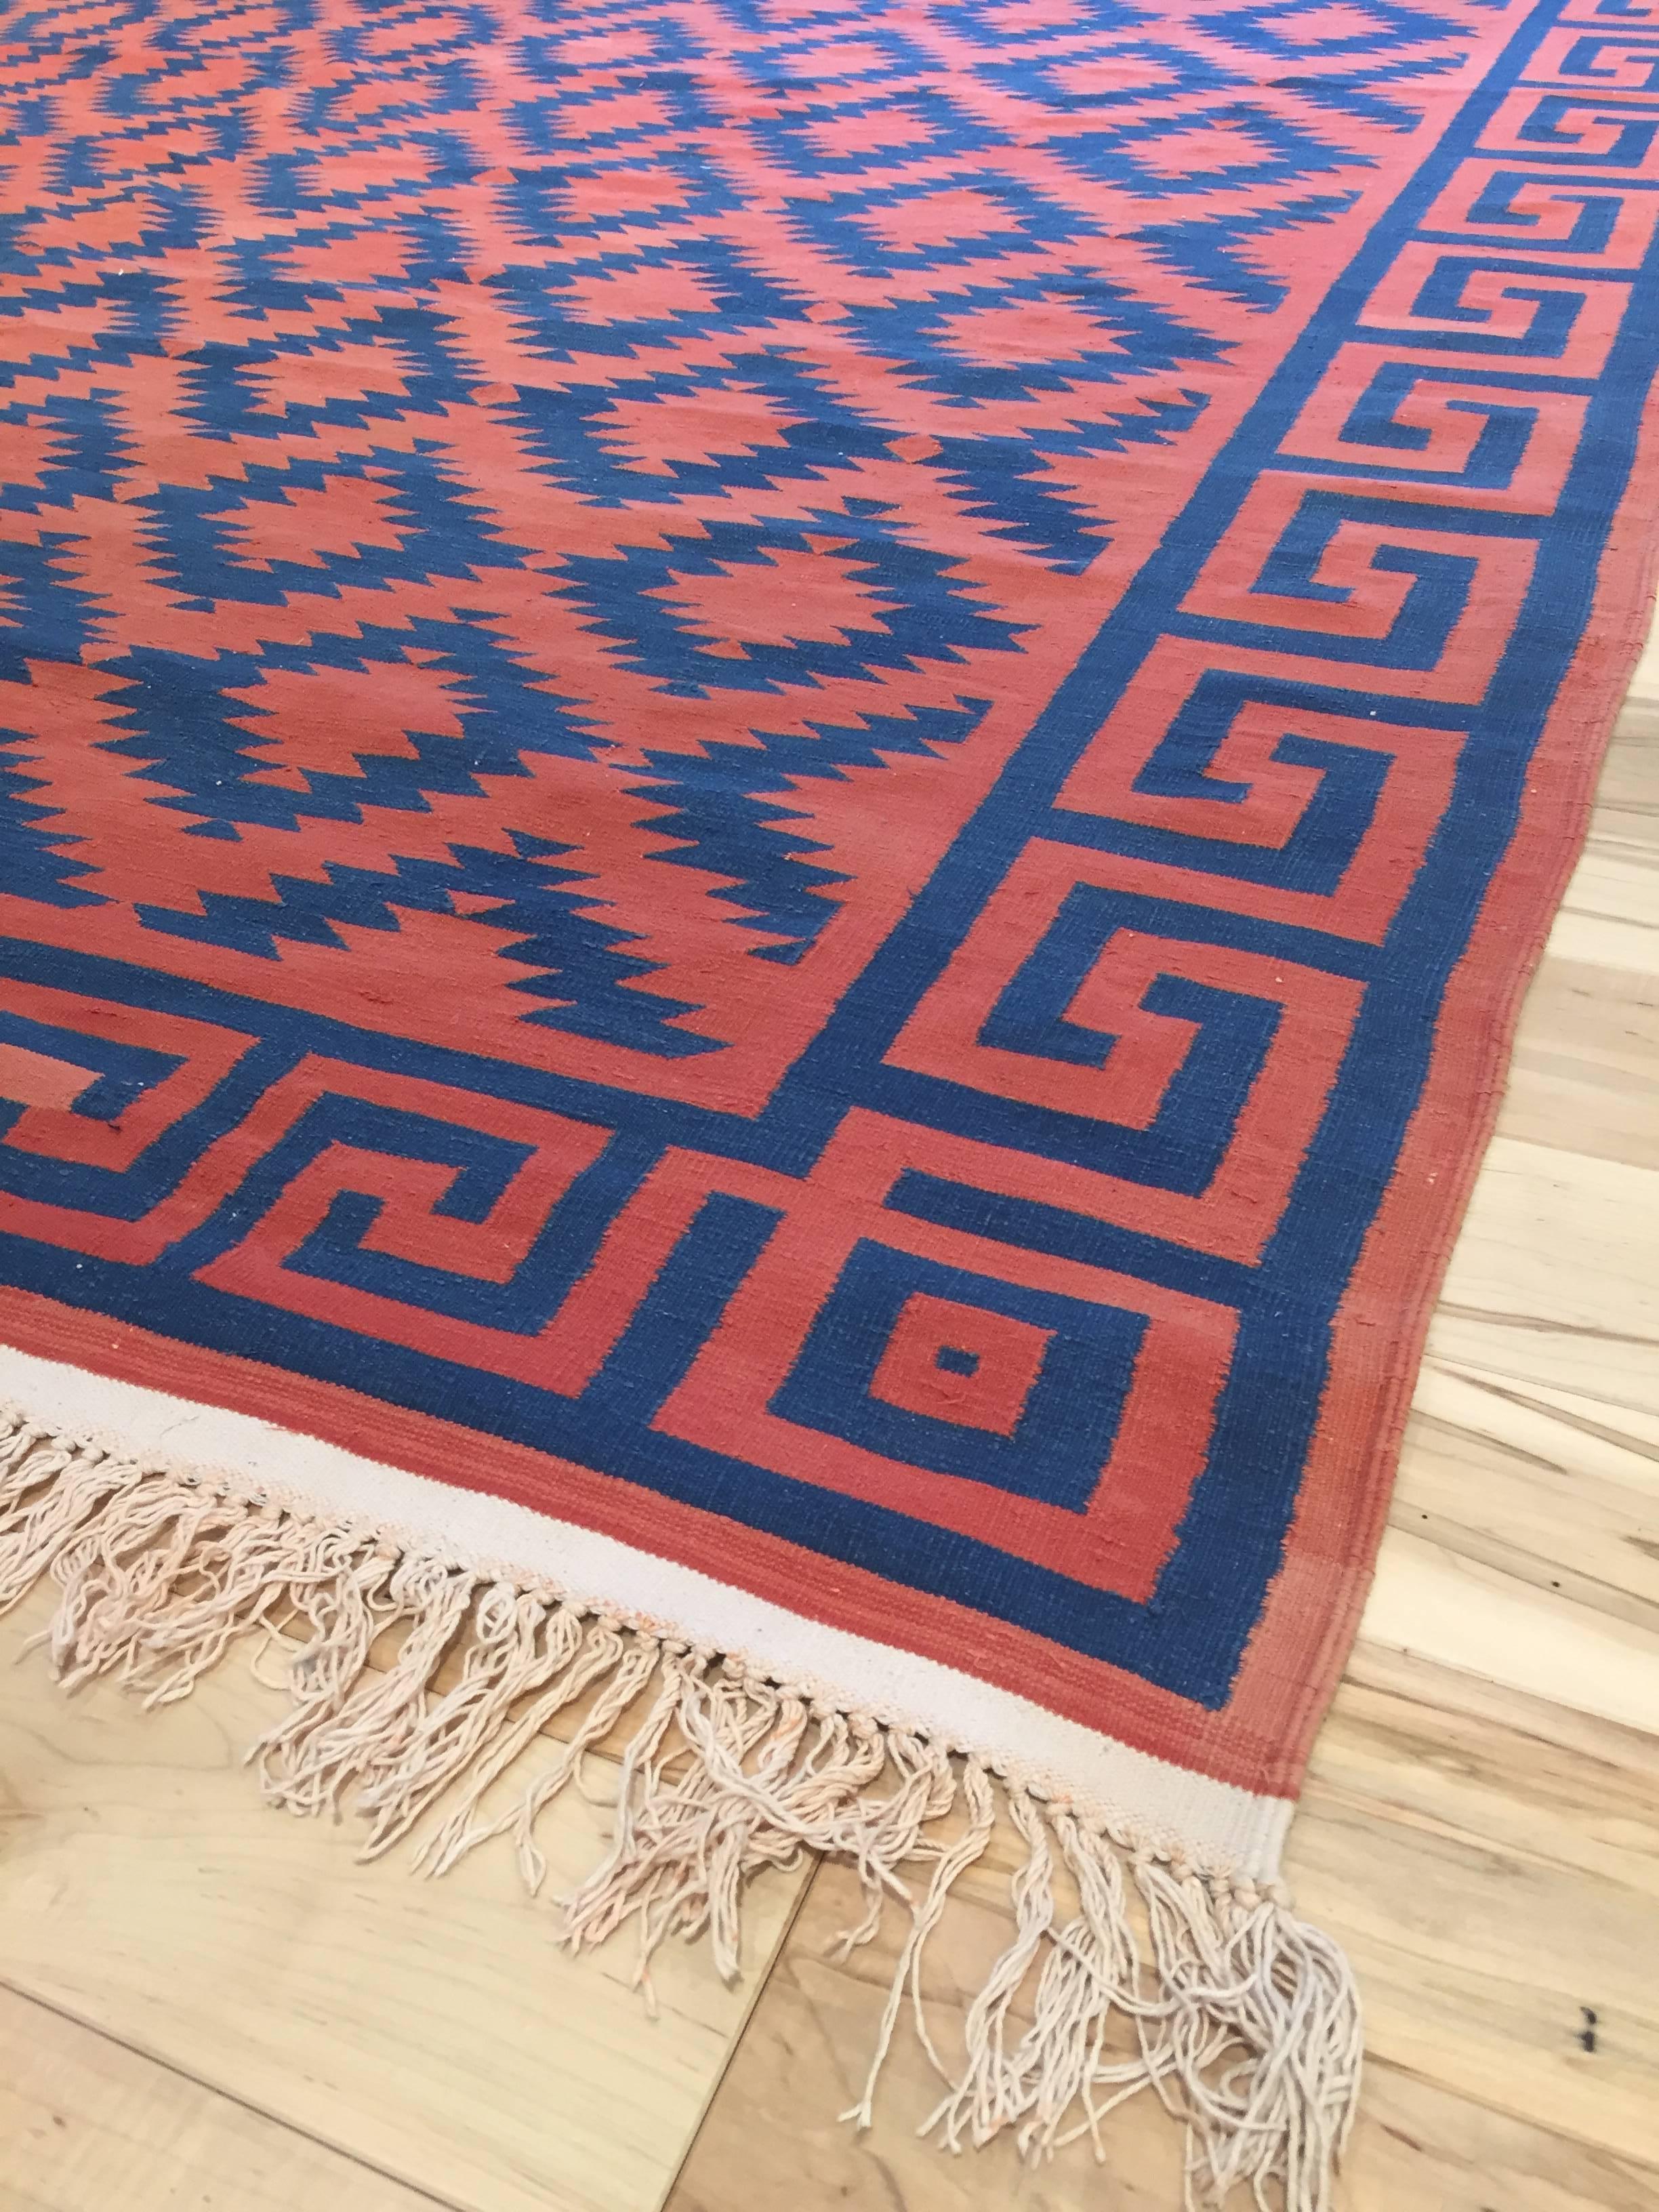 Handwoven Early 20th century Indian Dhurrie, circa 1910, Blue and Red stepped cross with Greek Key border.
